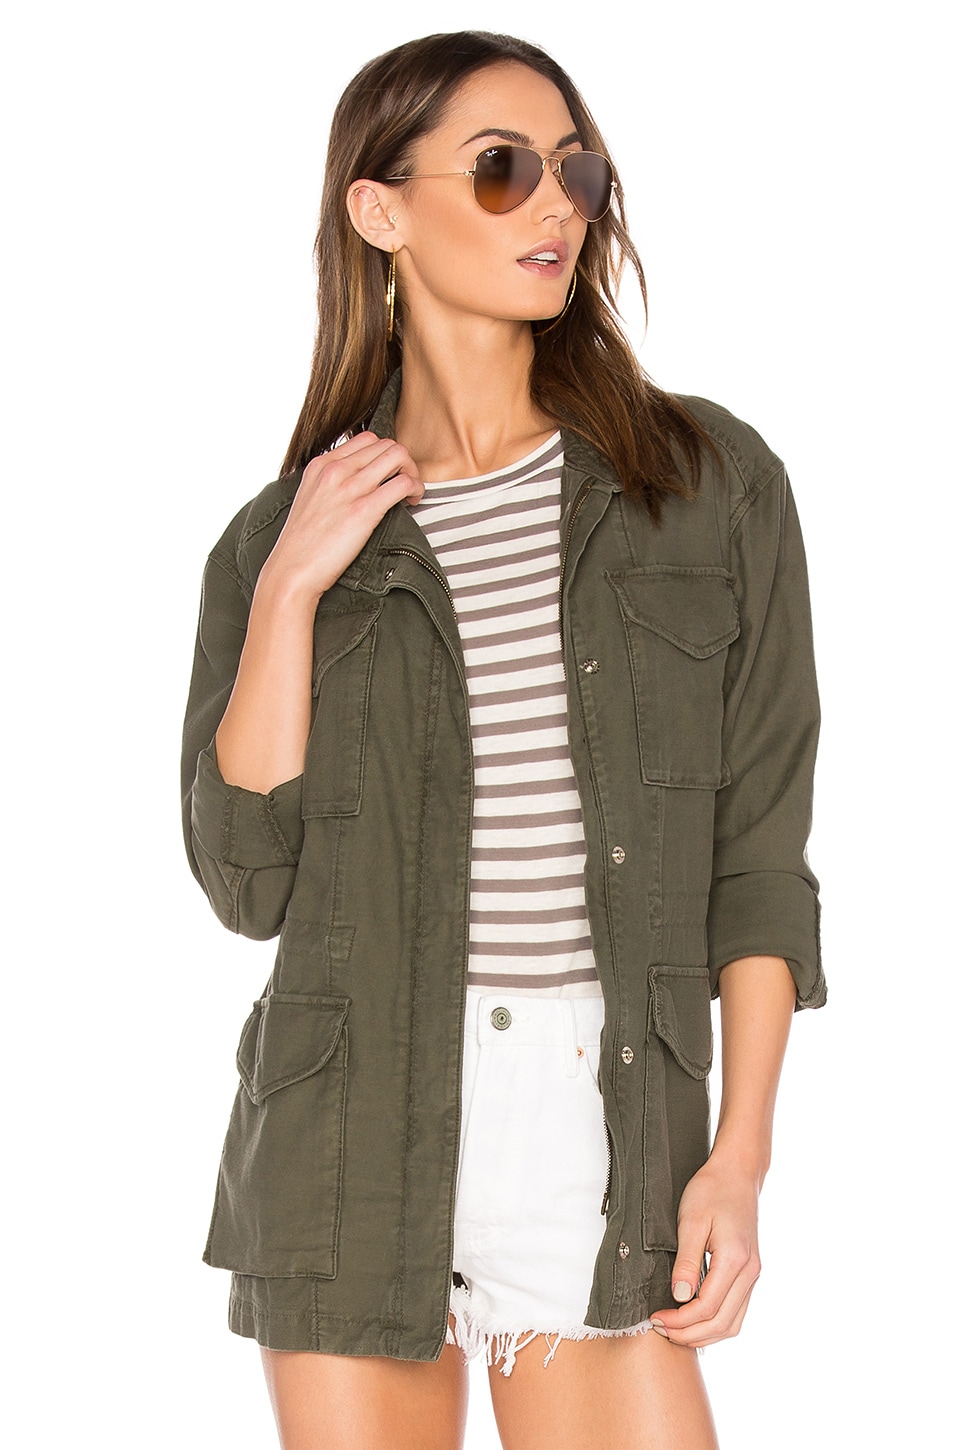 Vince Military Jacket in Army | REVOLVE